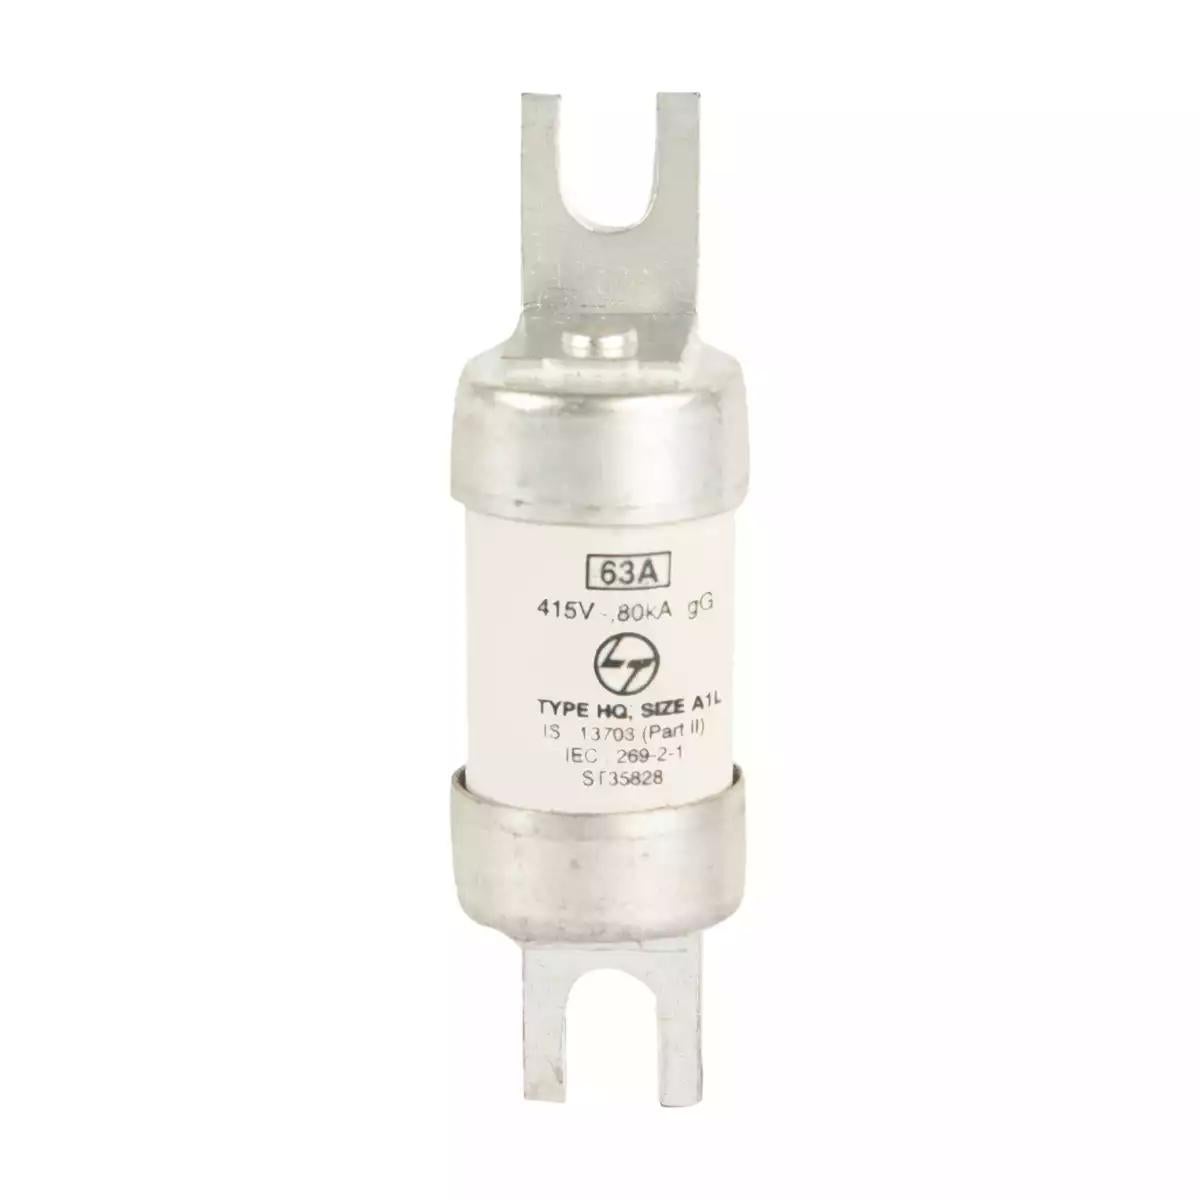 HQ Bolted HRC fuse 32A 415V AC Size A1L